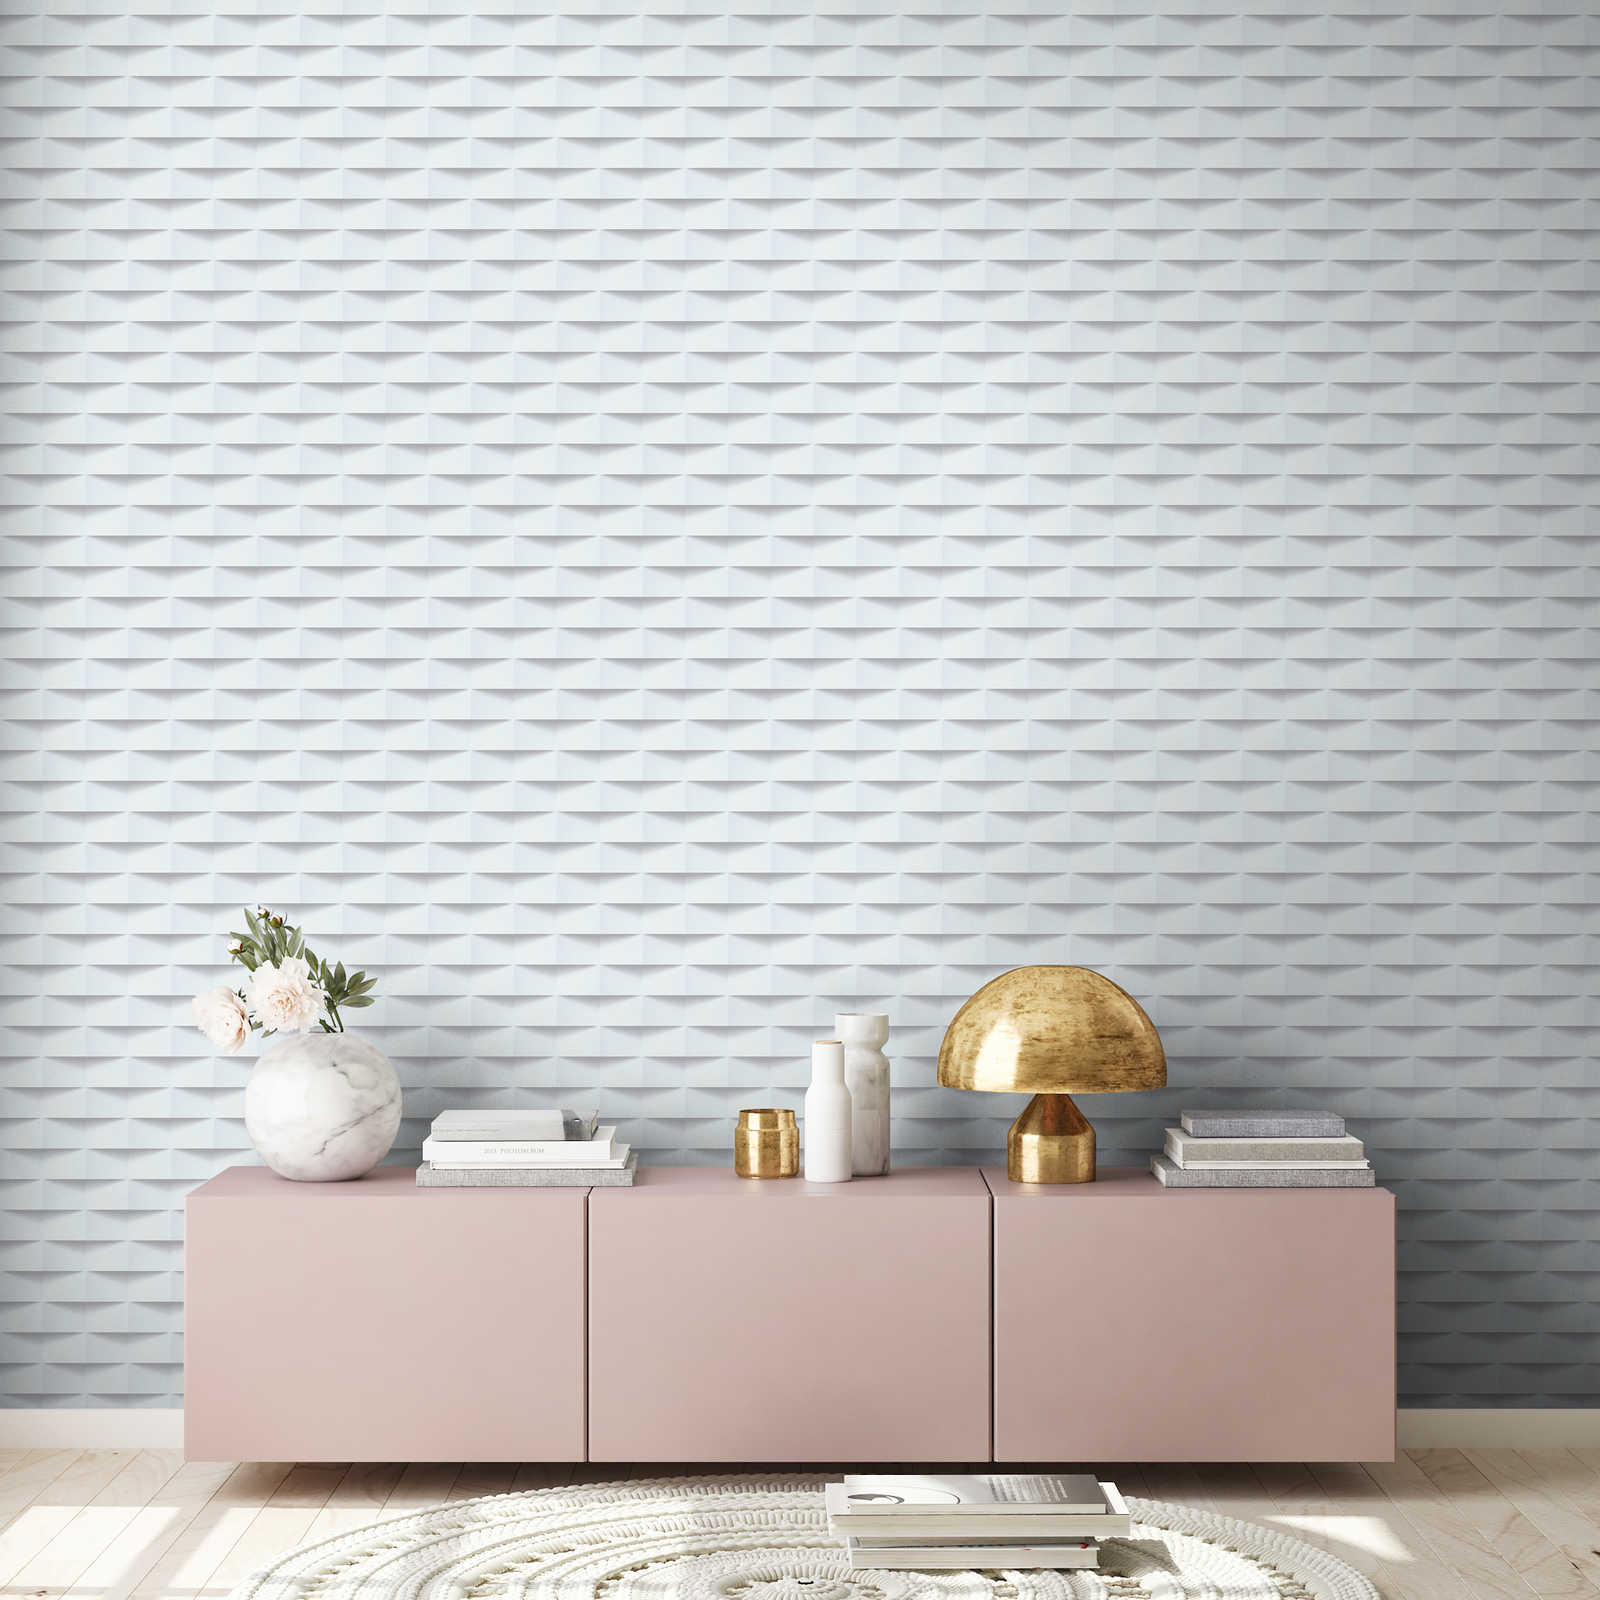             Self-adhesive wallpaper 3D look with graphic pattern - white
        